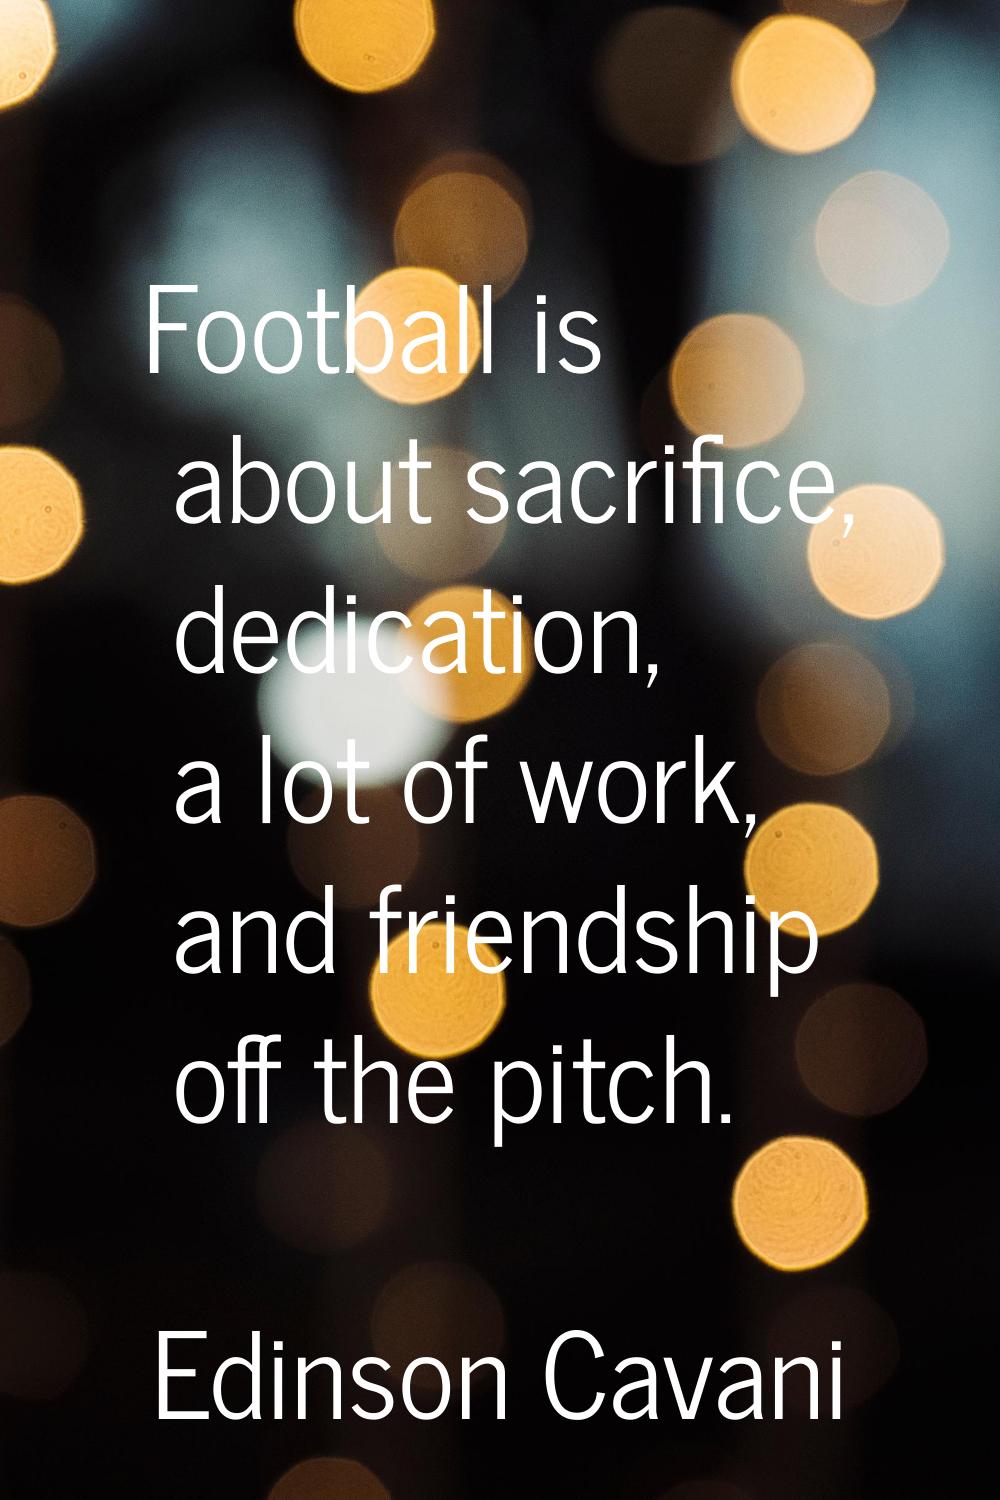 Football is about sacrifice, dedication, a lot of work, and friendship off the pitch.